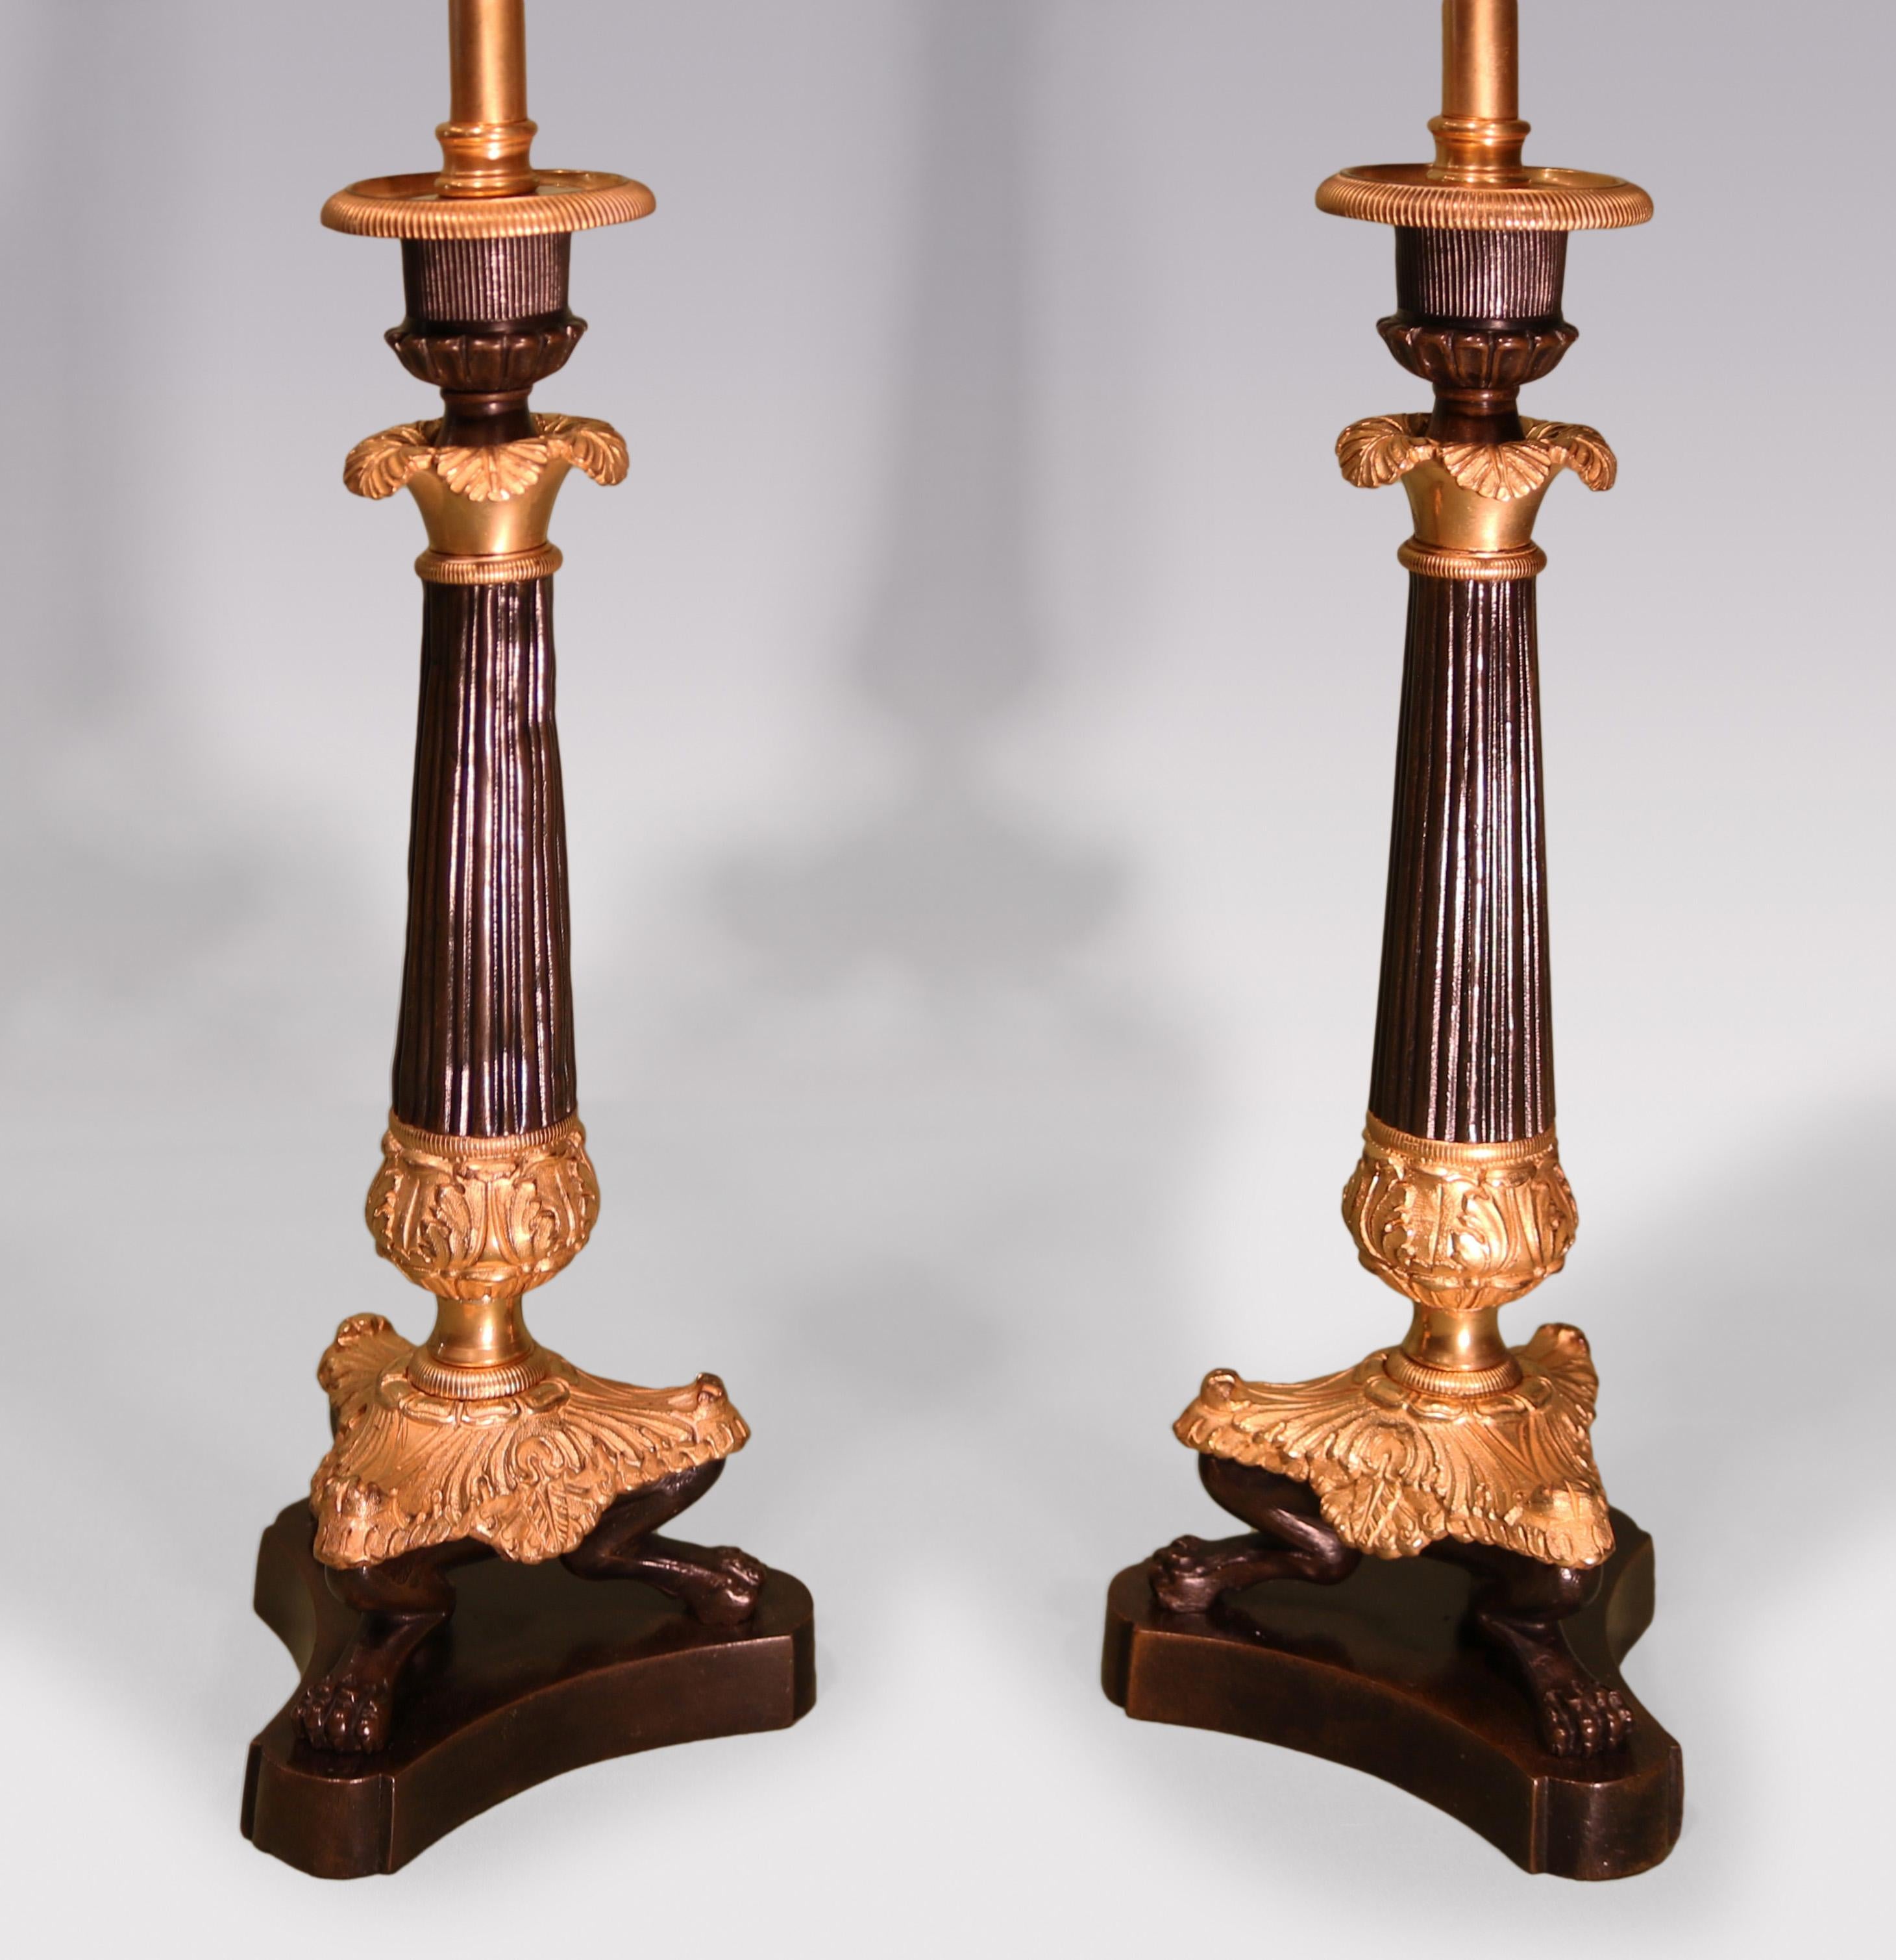 Antique Pair of Mid-19th Century Bronze and Ormolu Candlestick Lamps In Good Condition For Sale In London, GB